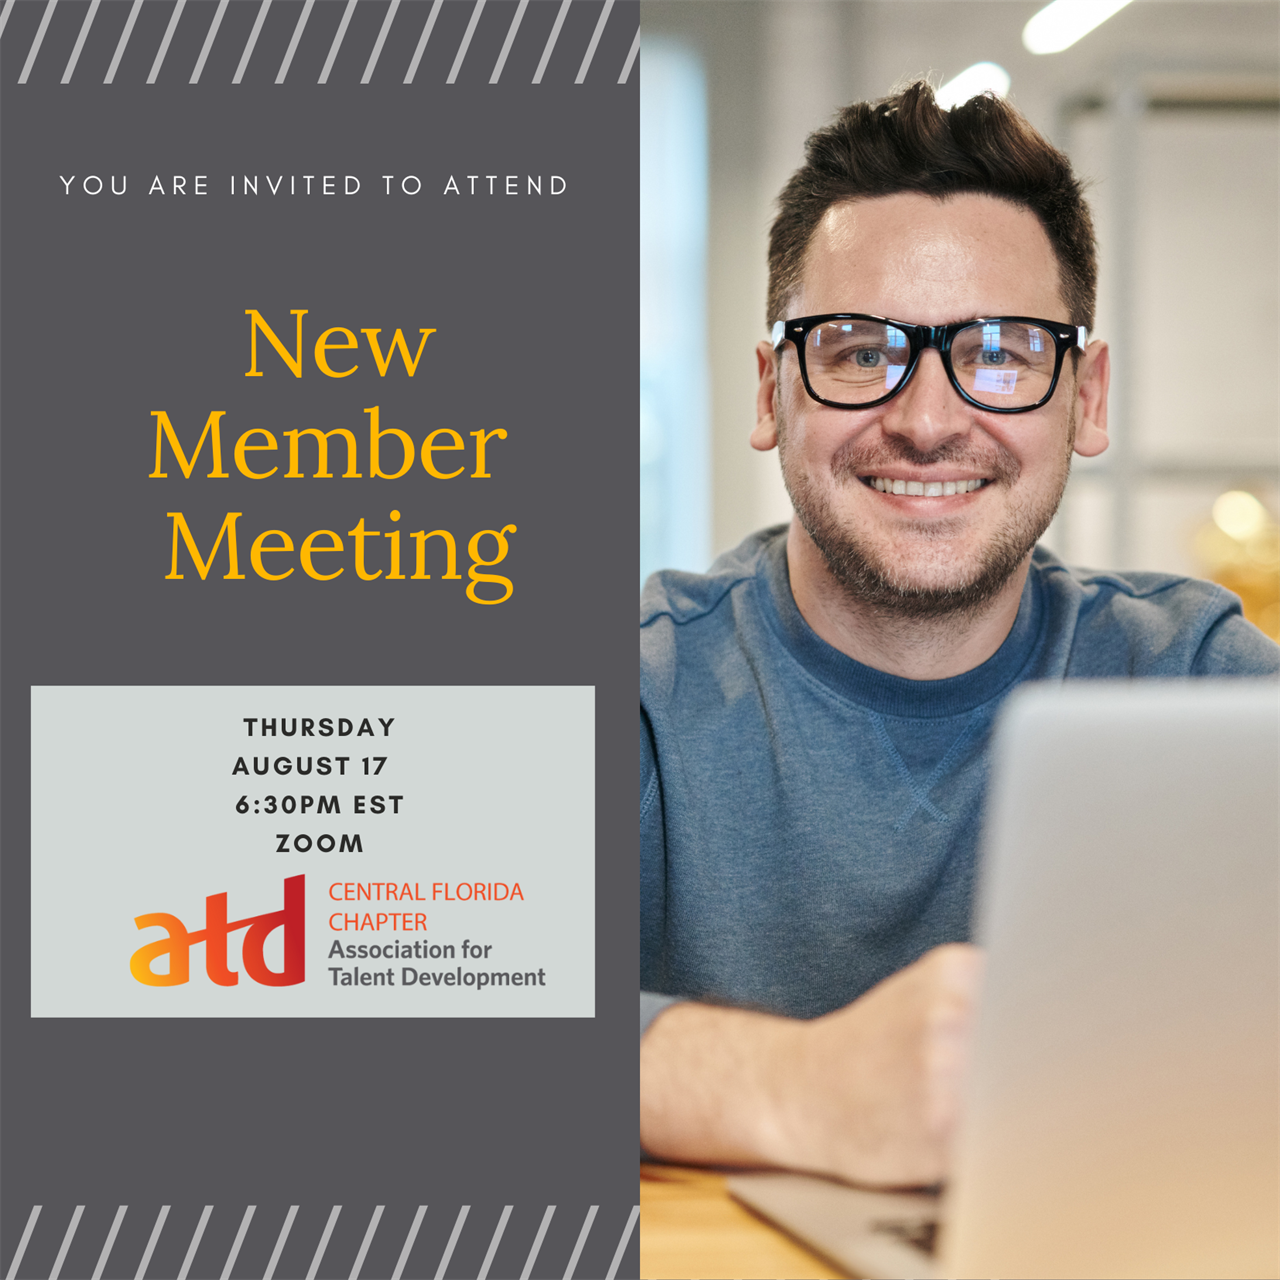 You are invited to attend New Member Meeting Thursday August 17 at 6:30 PM EST